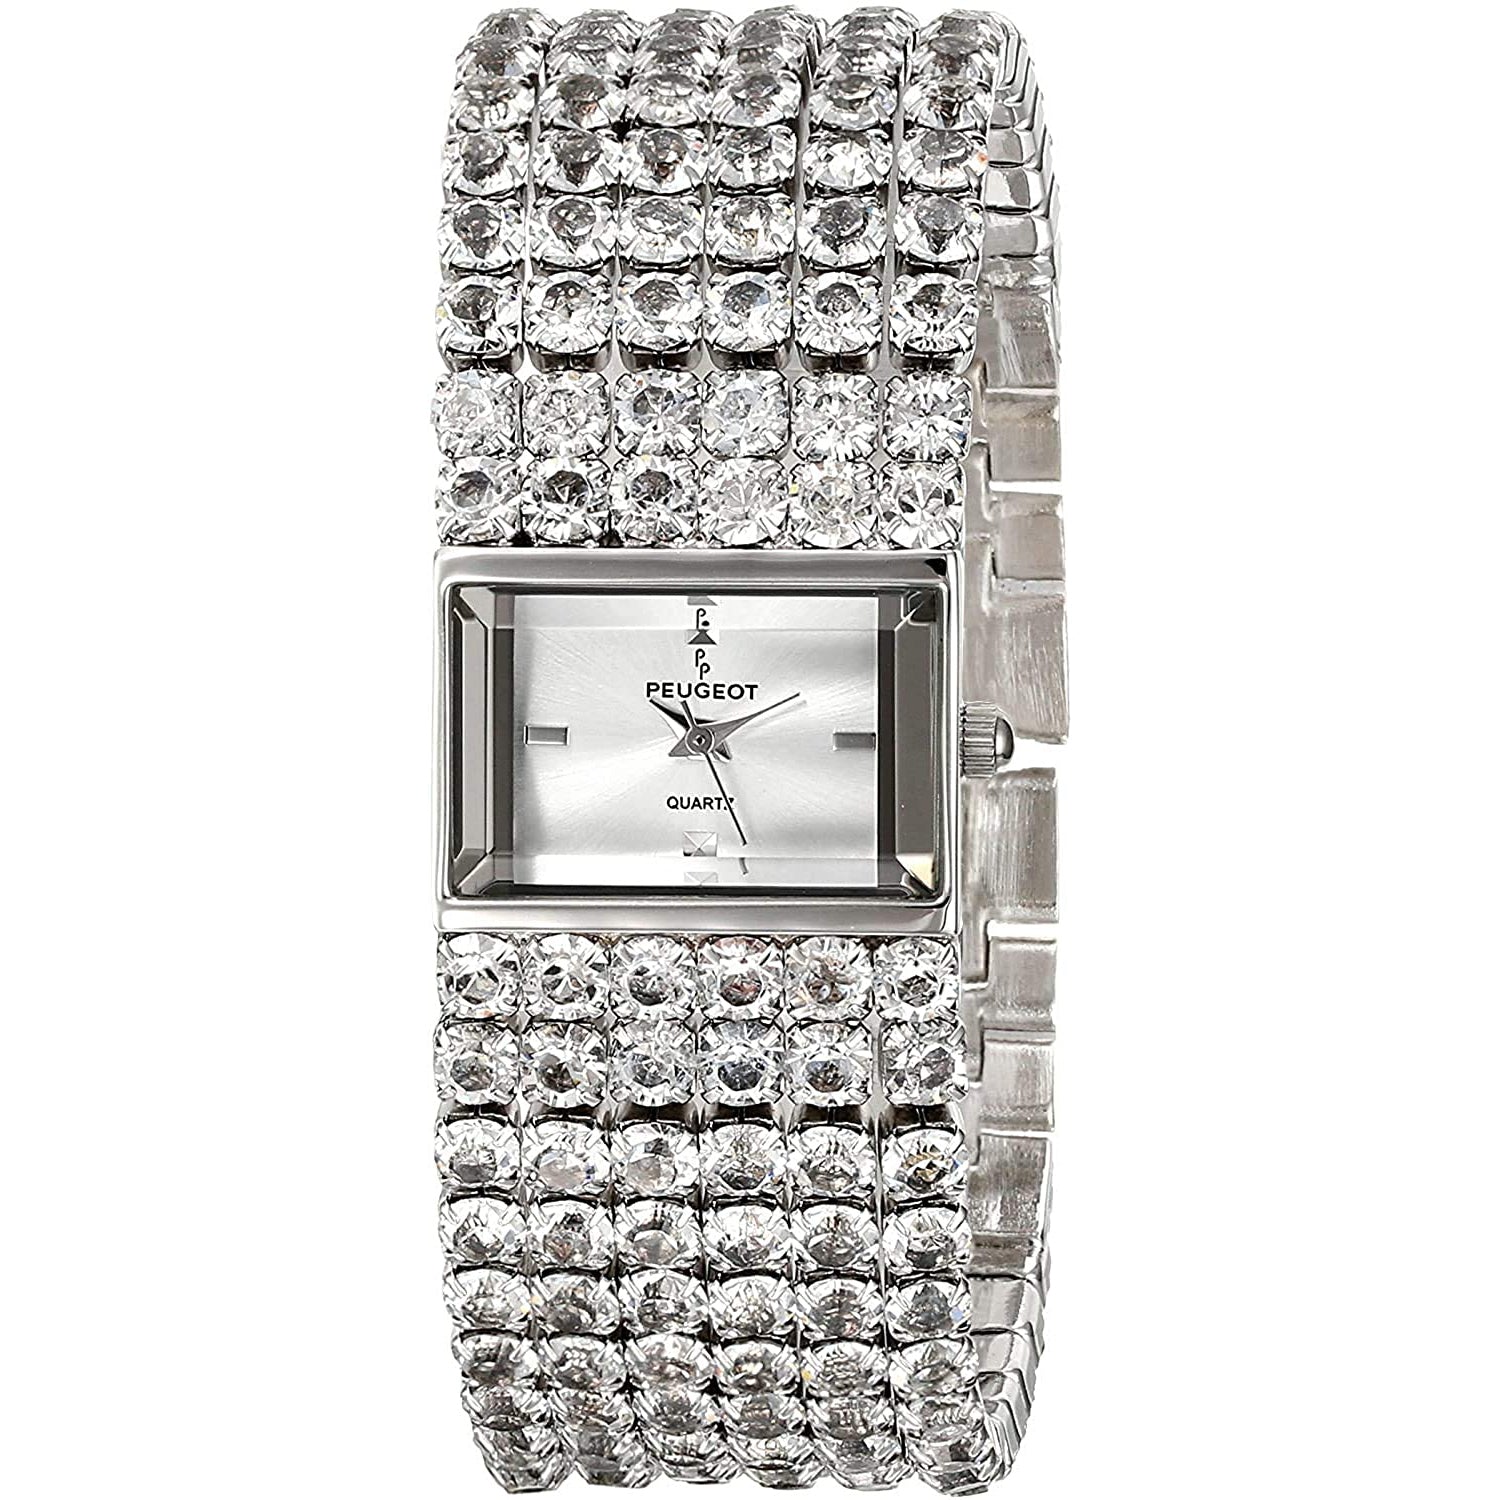 bejeweled watches - Jewelry Connoisseur